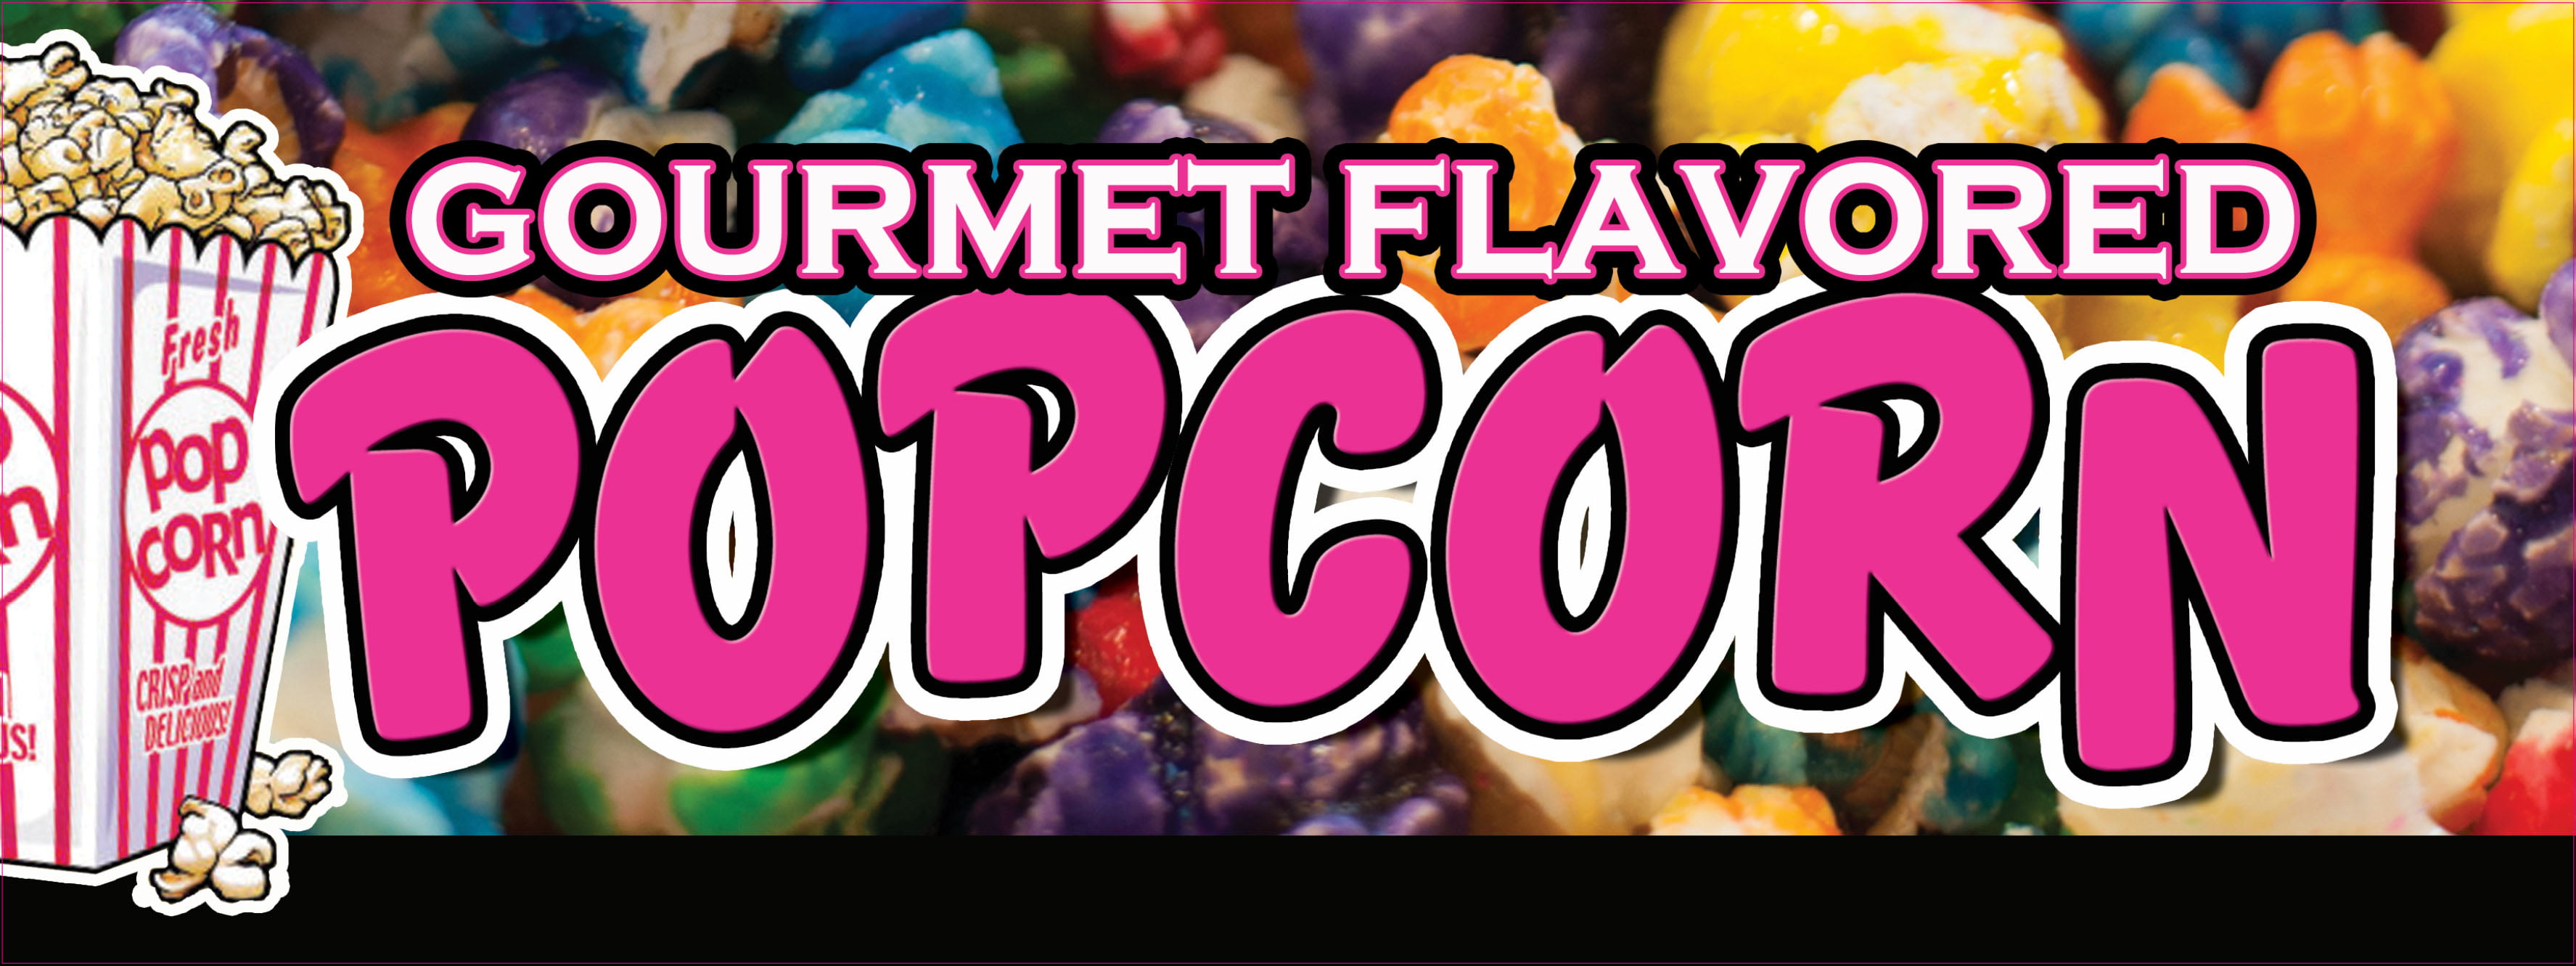 CHOOSE YOUR SIZE Gourmet Flavored Popcorn DECAL Concession Food Truck Sticker 